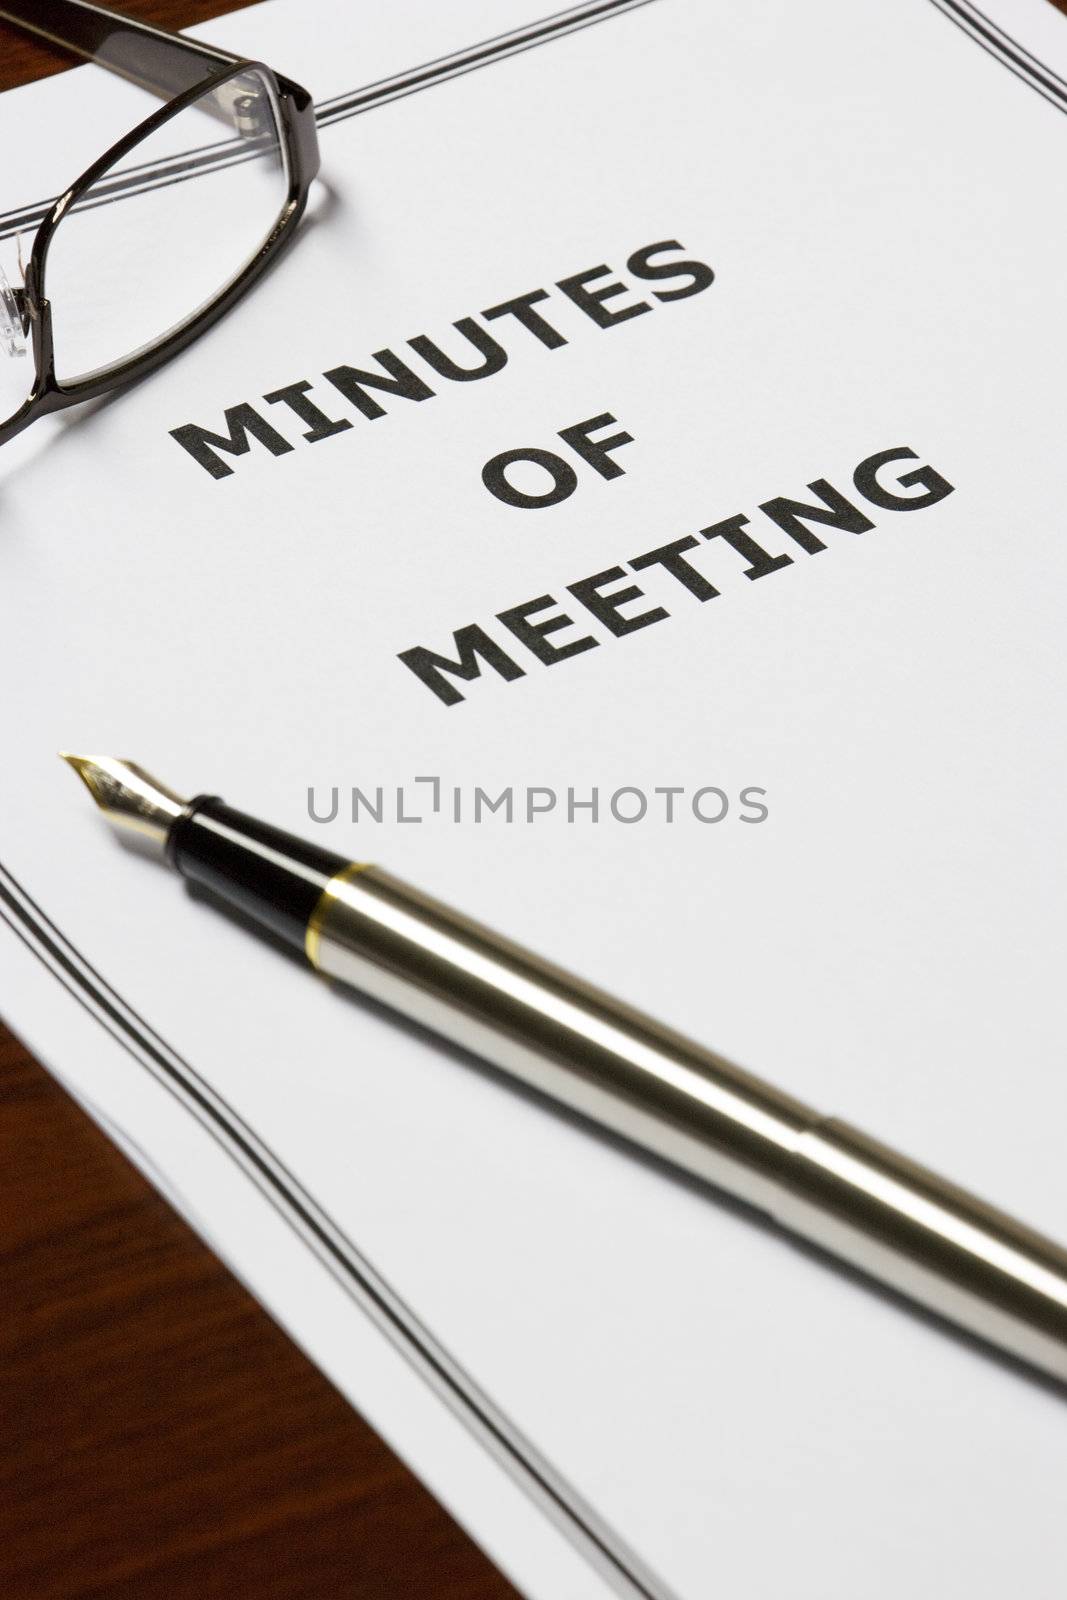 Minutes of Meeting by shariffc